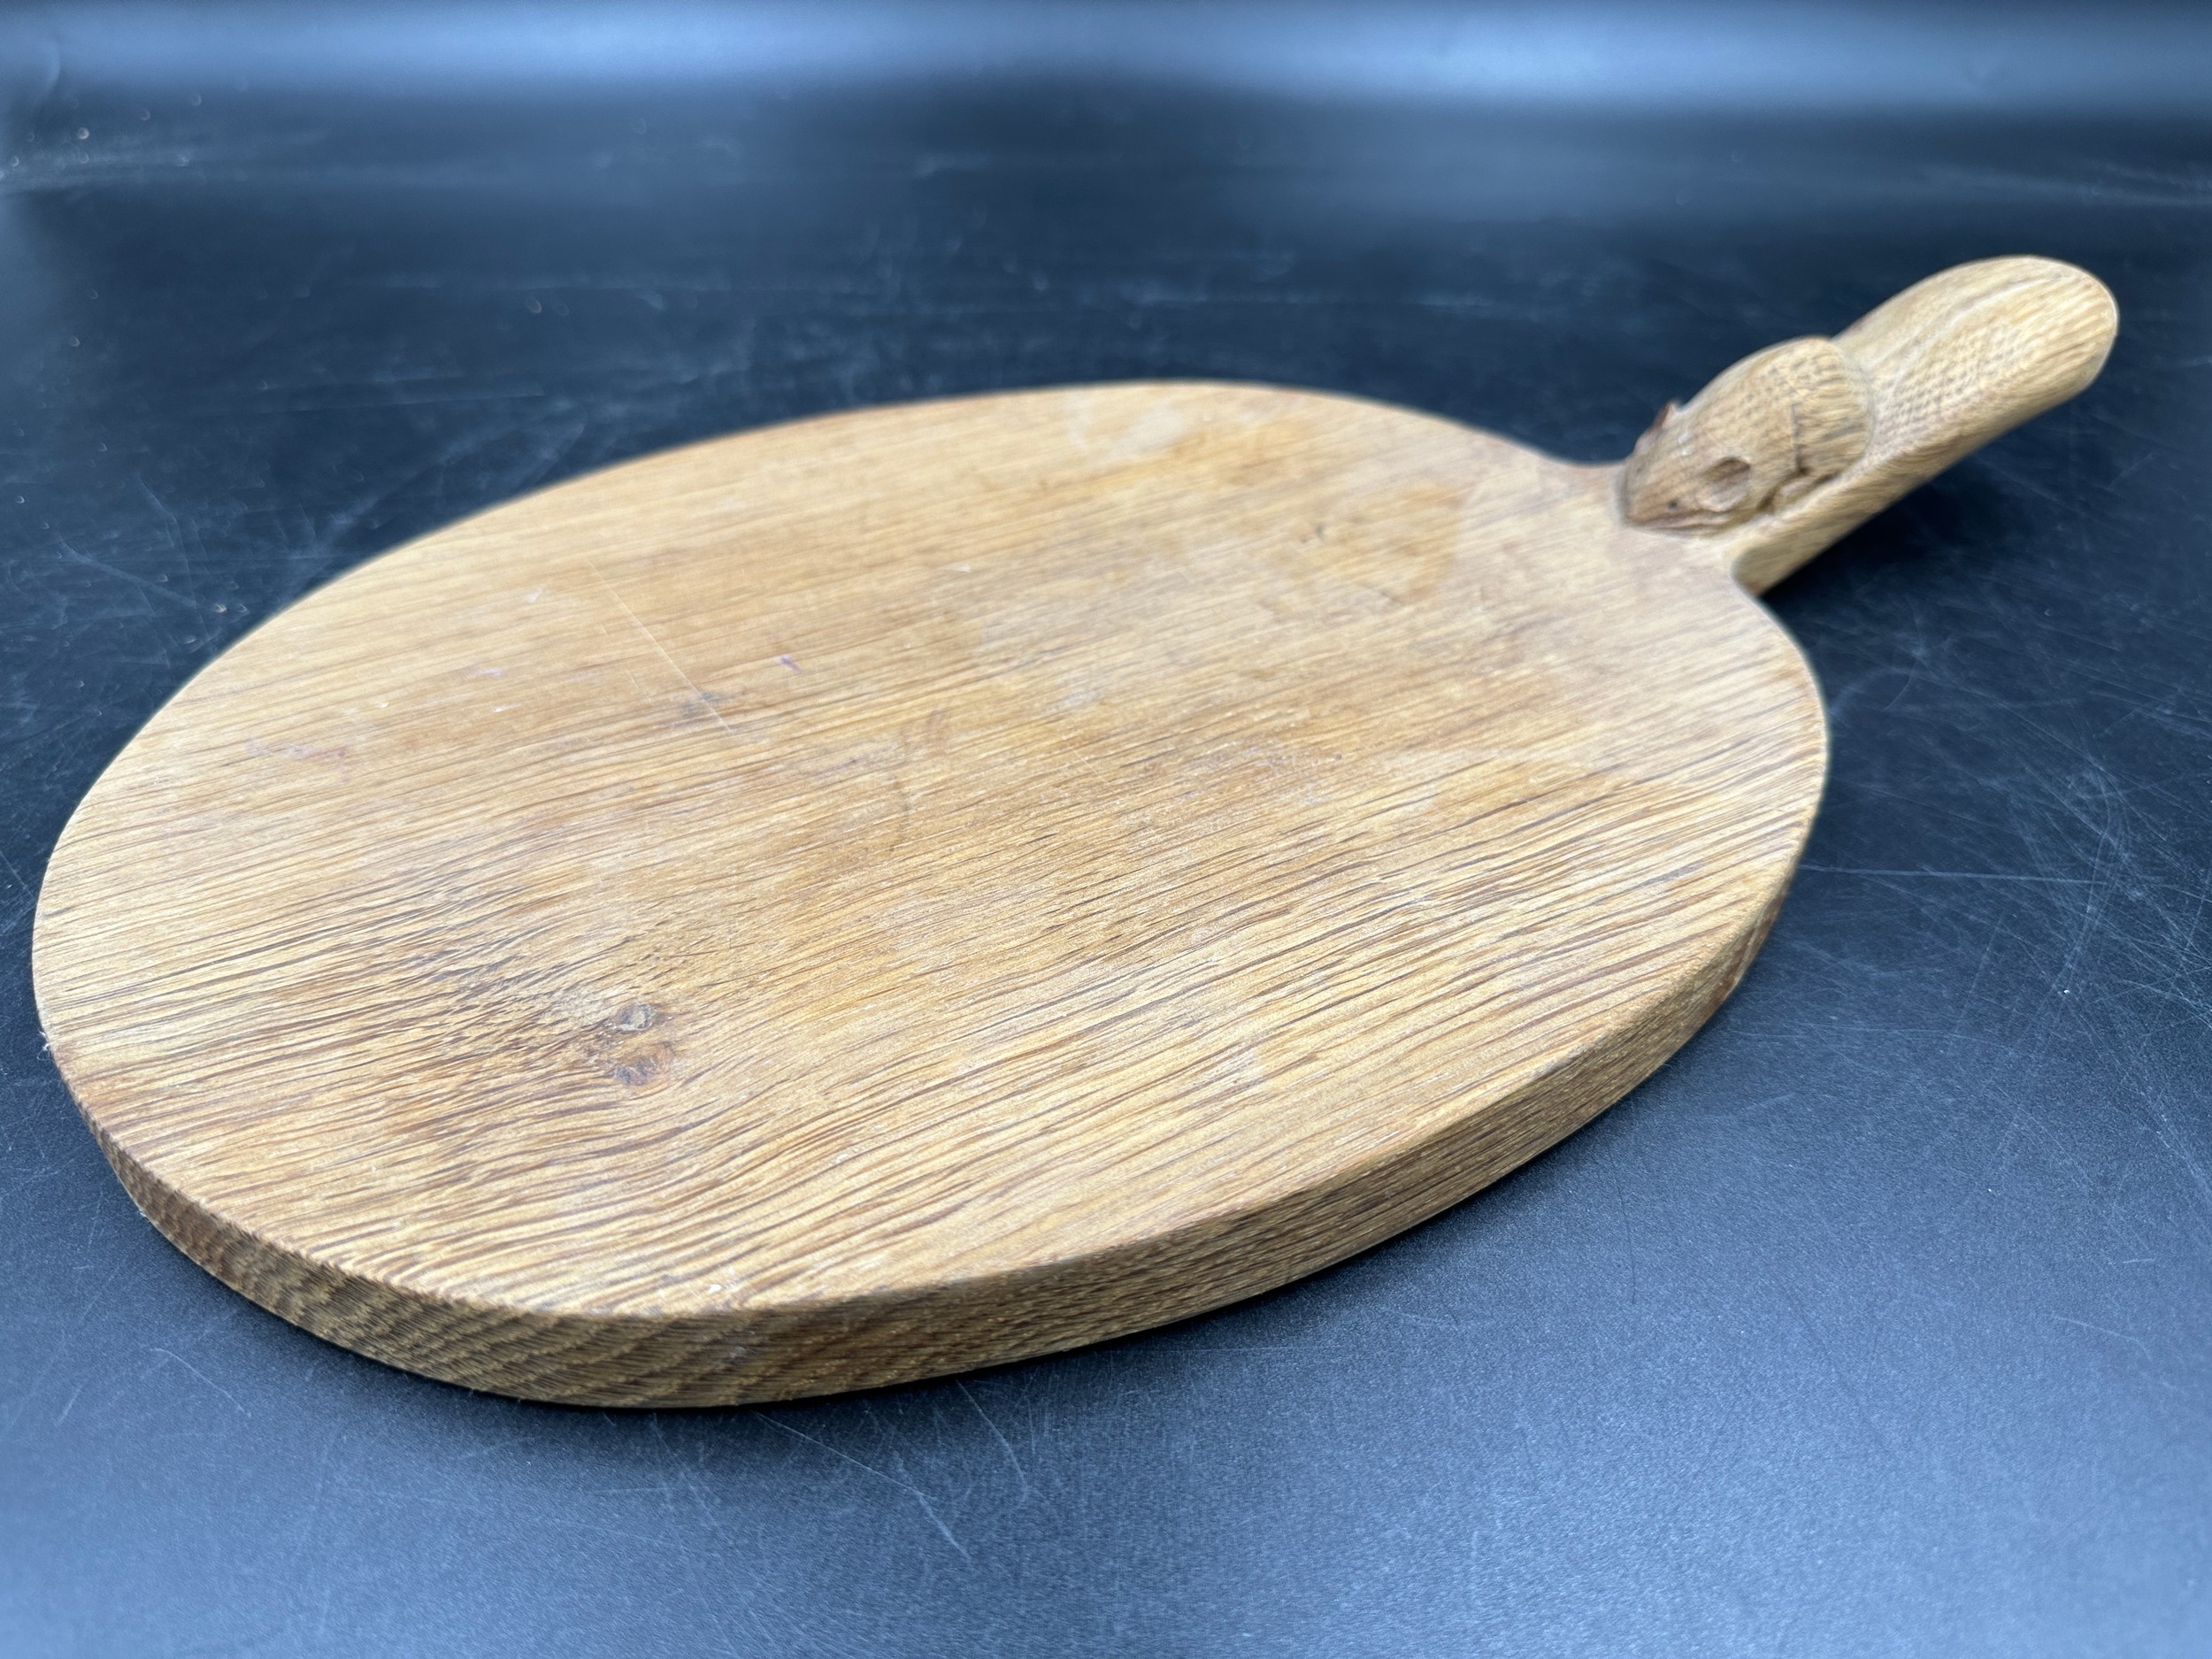 Robert Thompson 'Mouseman' of Kilburn, an adzed oak cheese board of oval form with a carved mouse - Image 3 of 5